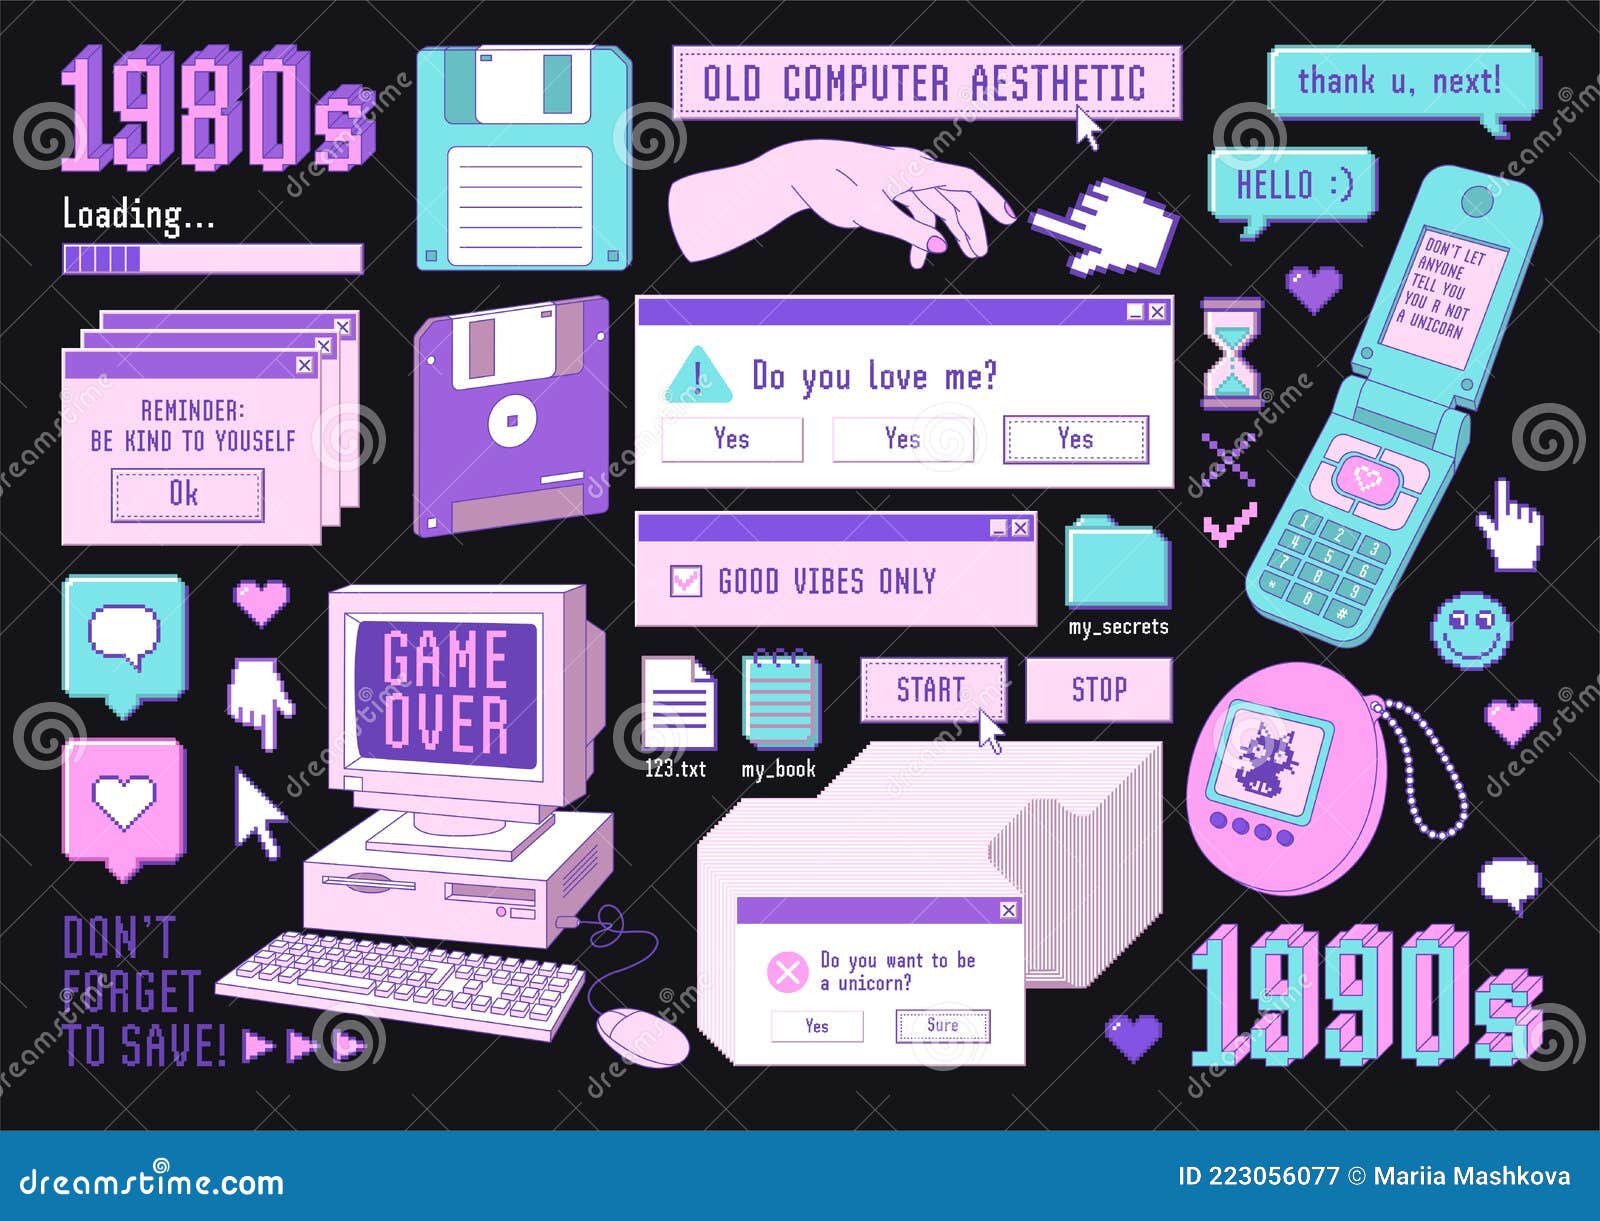 Sticker pack of retro pc elements. Old computer aestethic 1980s -1990s. Sticker pack of retro pc elements. Old computer aestethic. Set of user interface elements and technology illustration in trendy retrowave style. Nostalgia for 1980s -1990s.